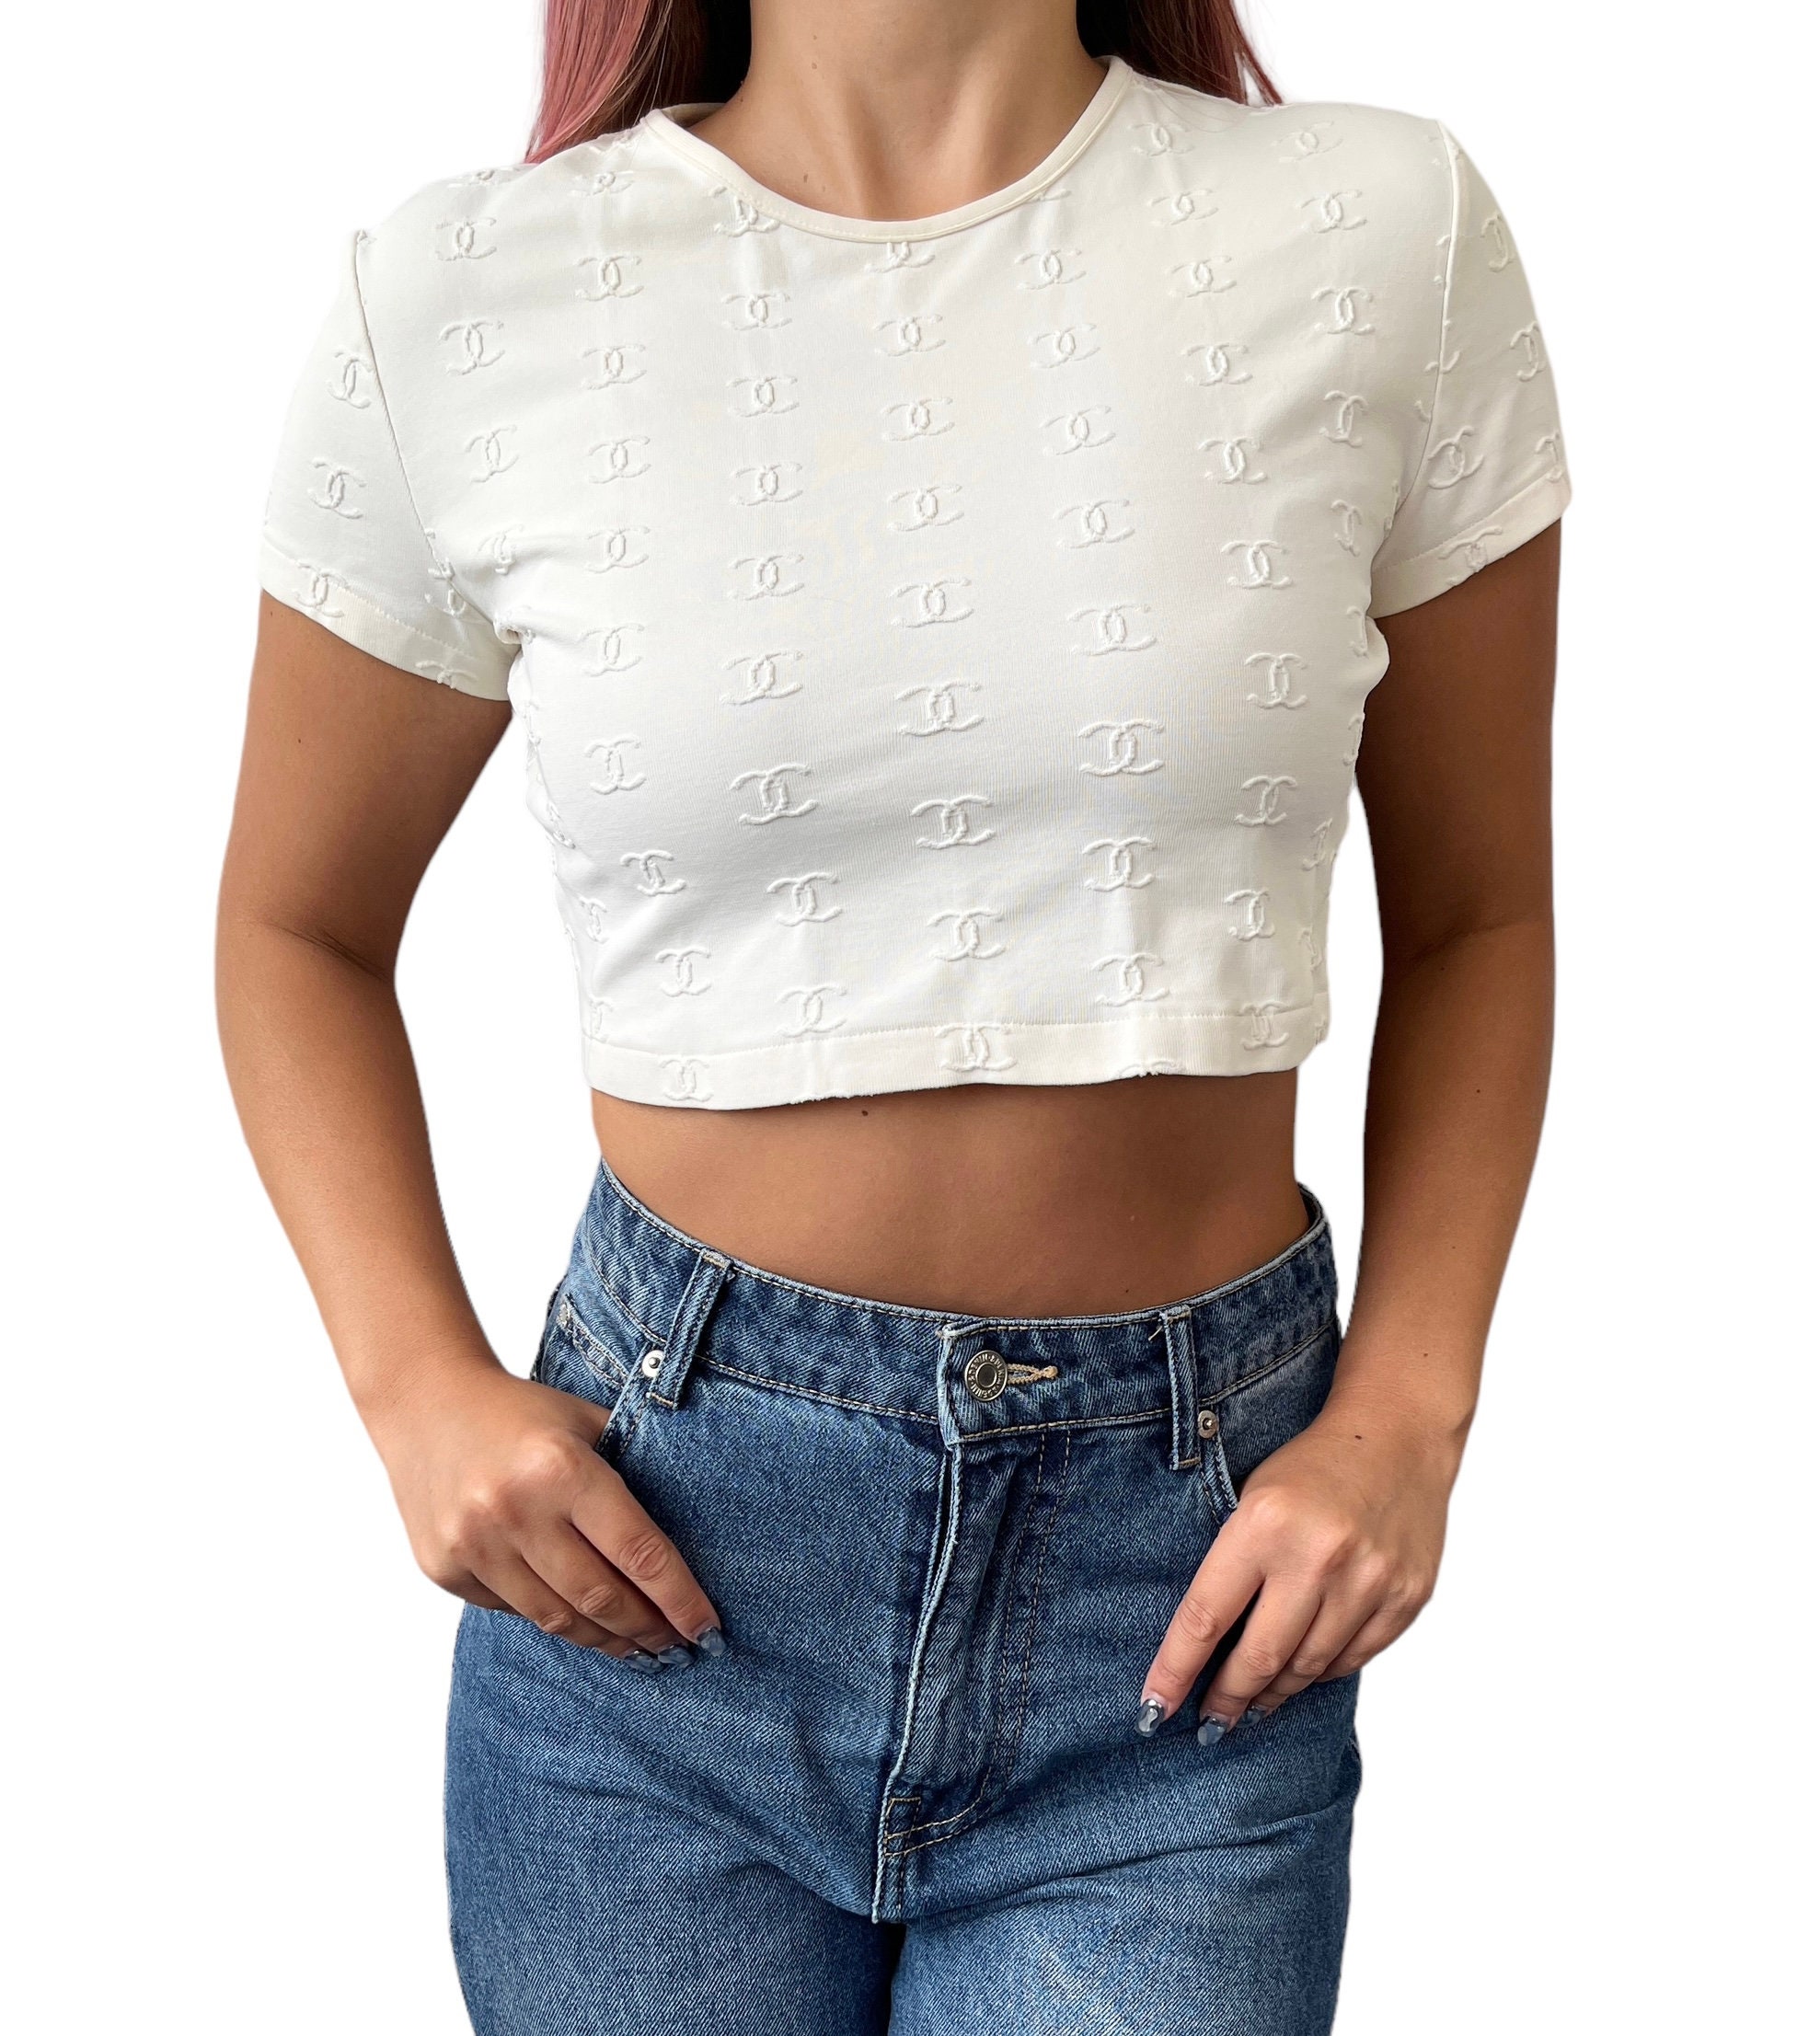 CHANEL, Tops, Auth Chanel Logo White Button Up Crop Top Shirt Sz34  Popular Rare